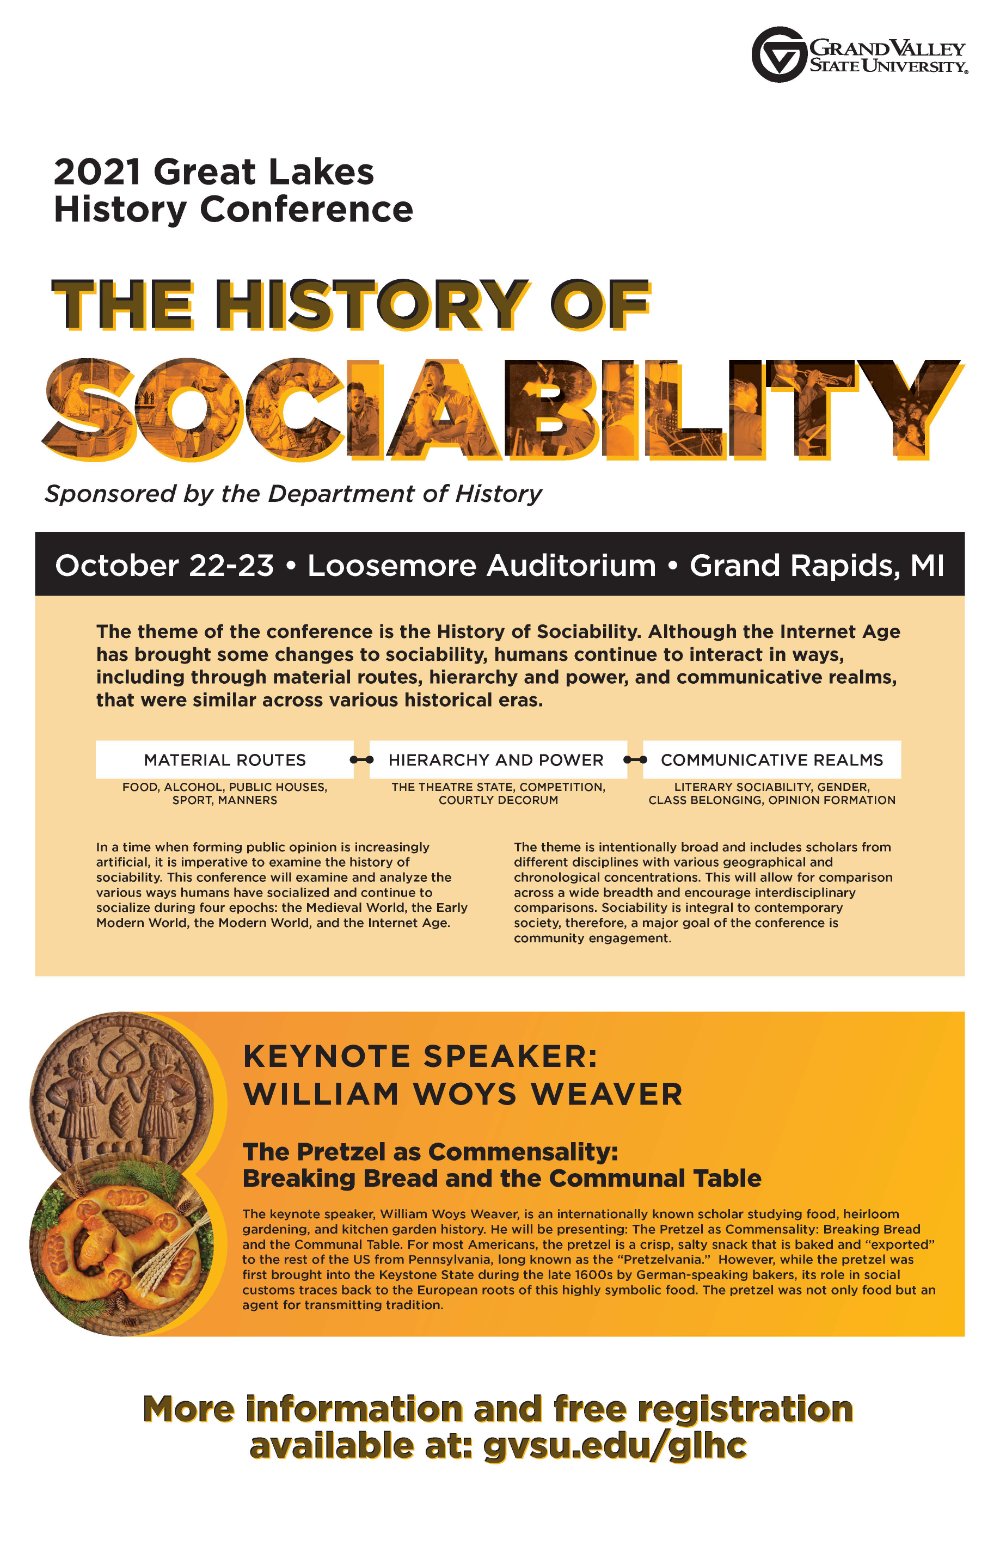 flier about great lakes history conference